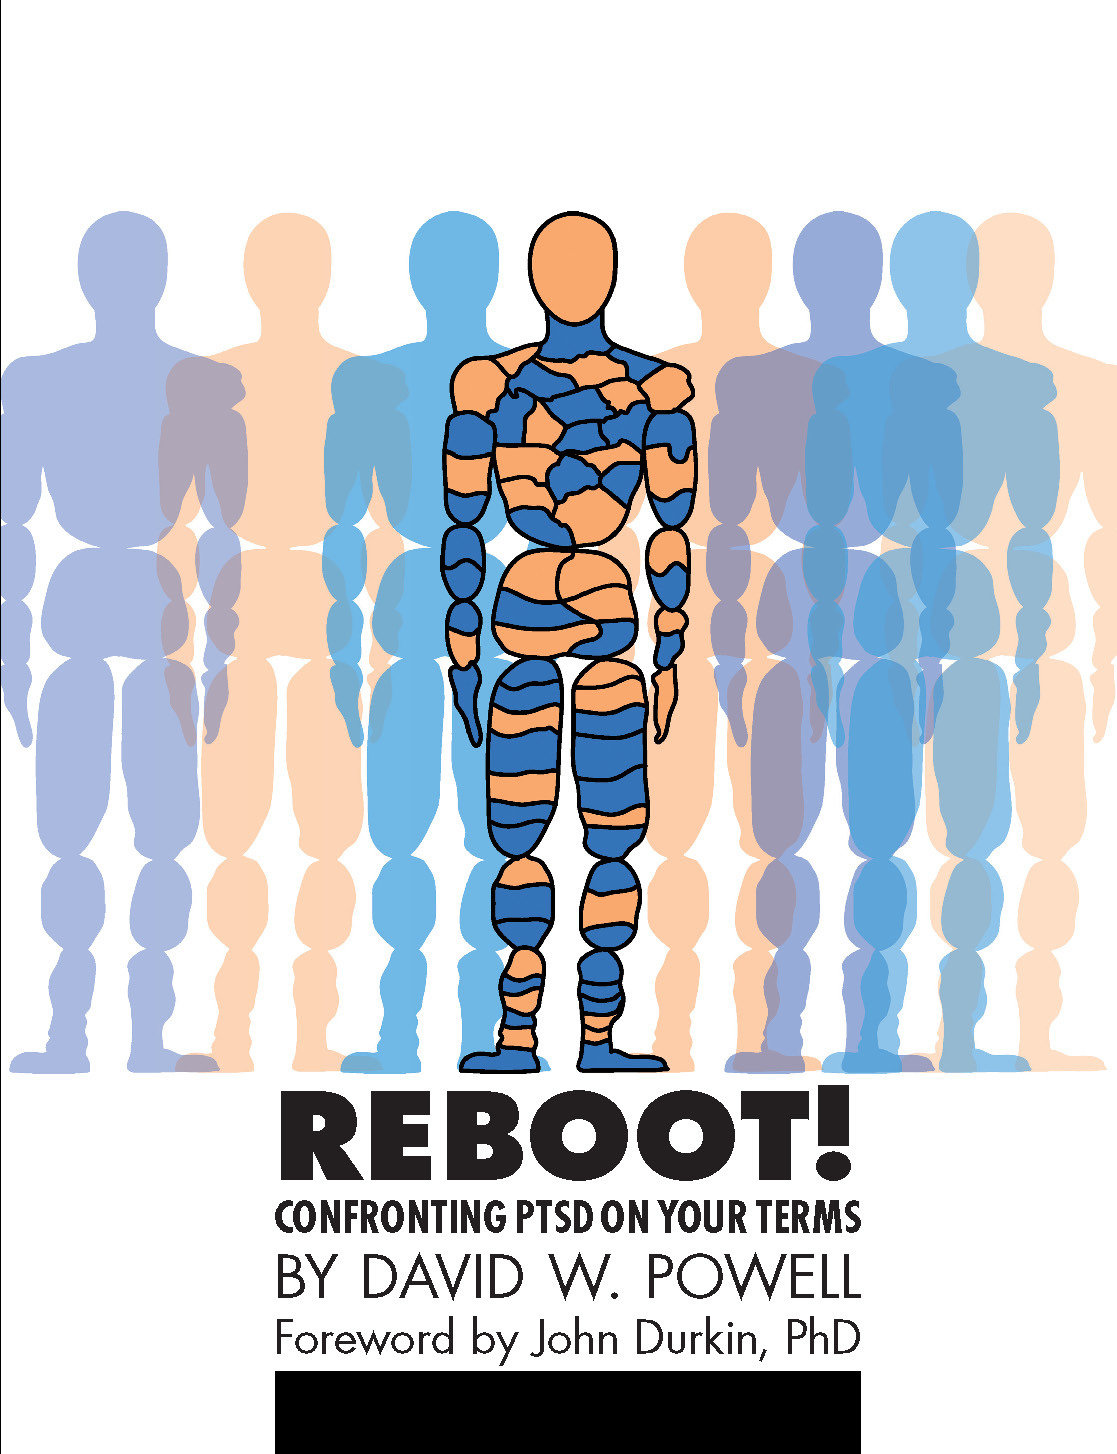 REBOOT!: Confronting PTSD on Your Terms